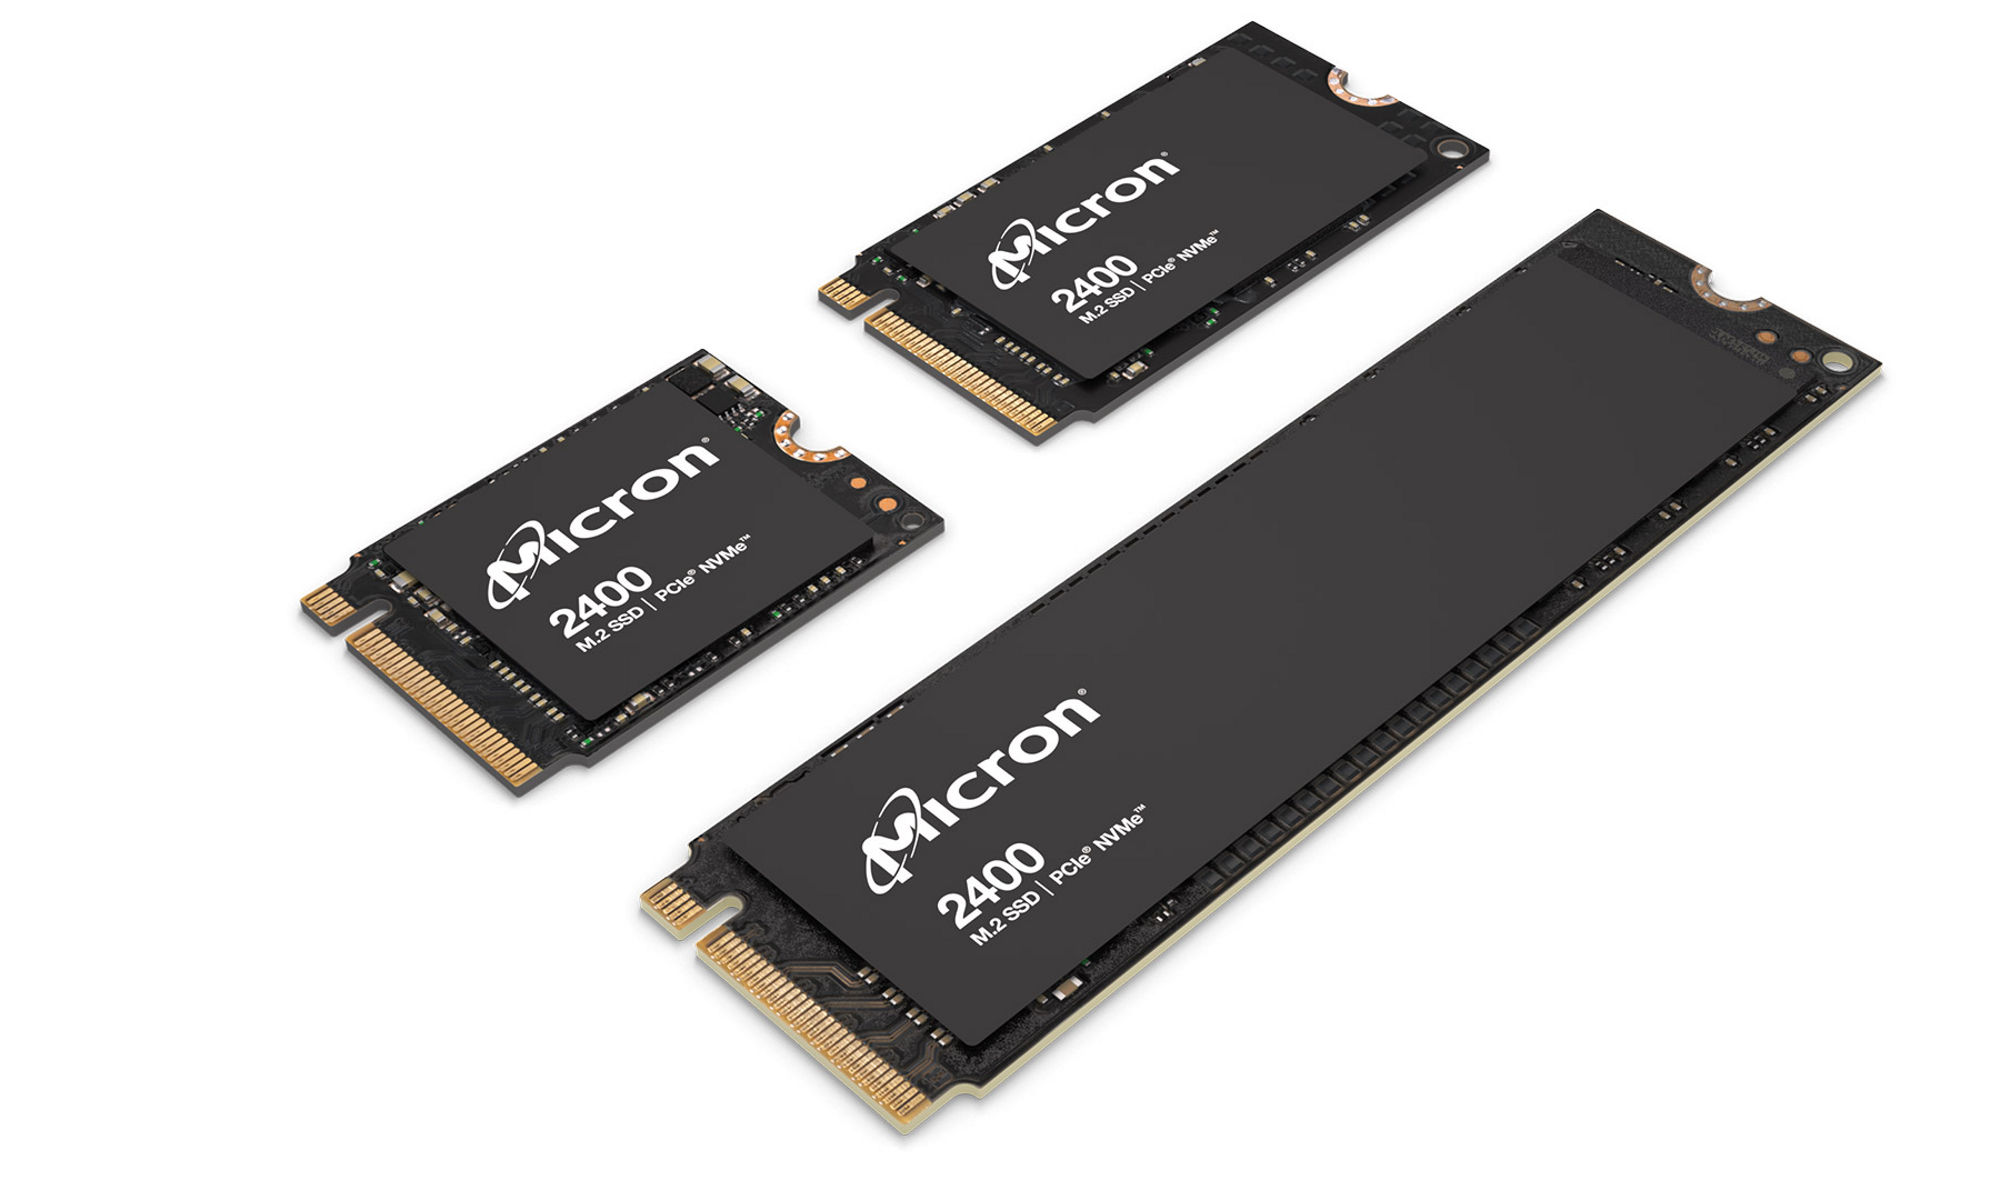 Micron 2400 M.2 SSDs in three form factors